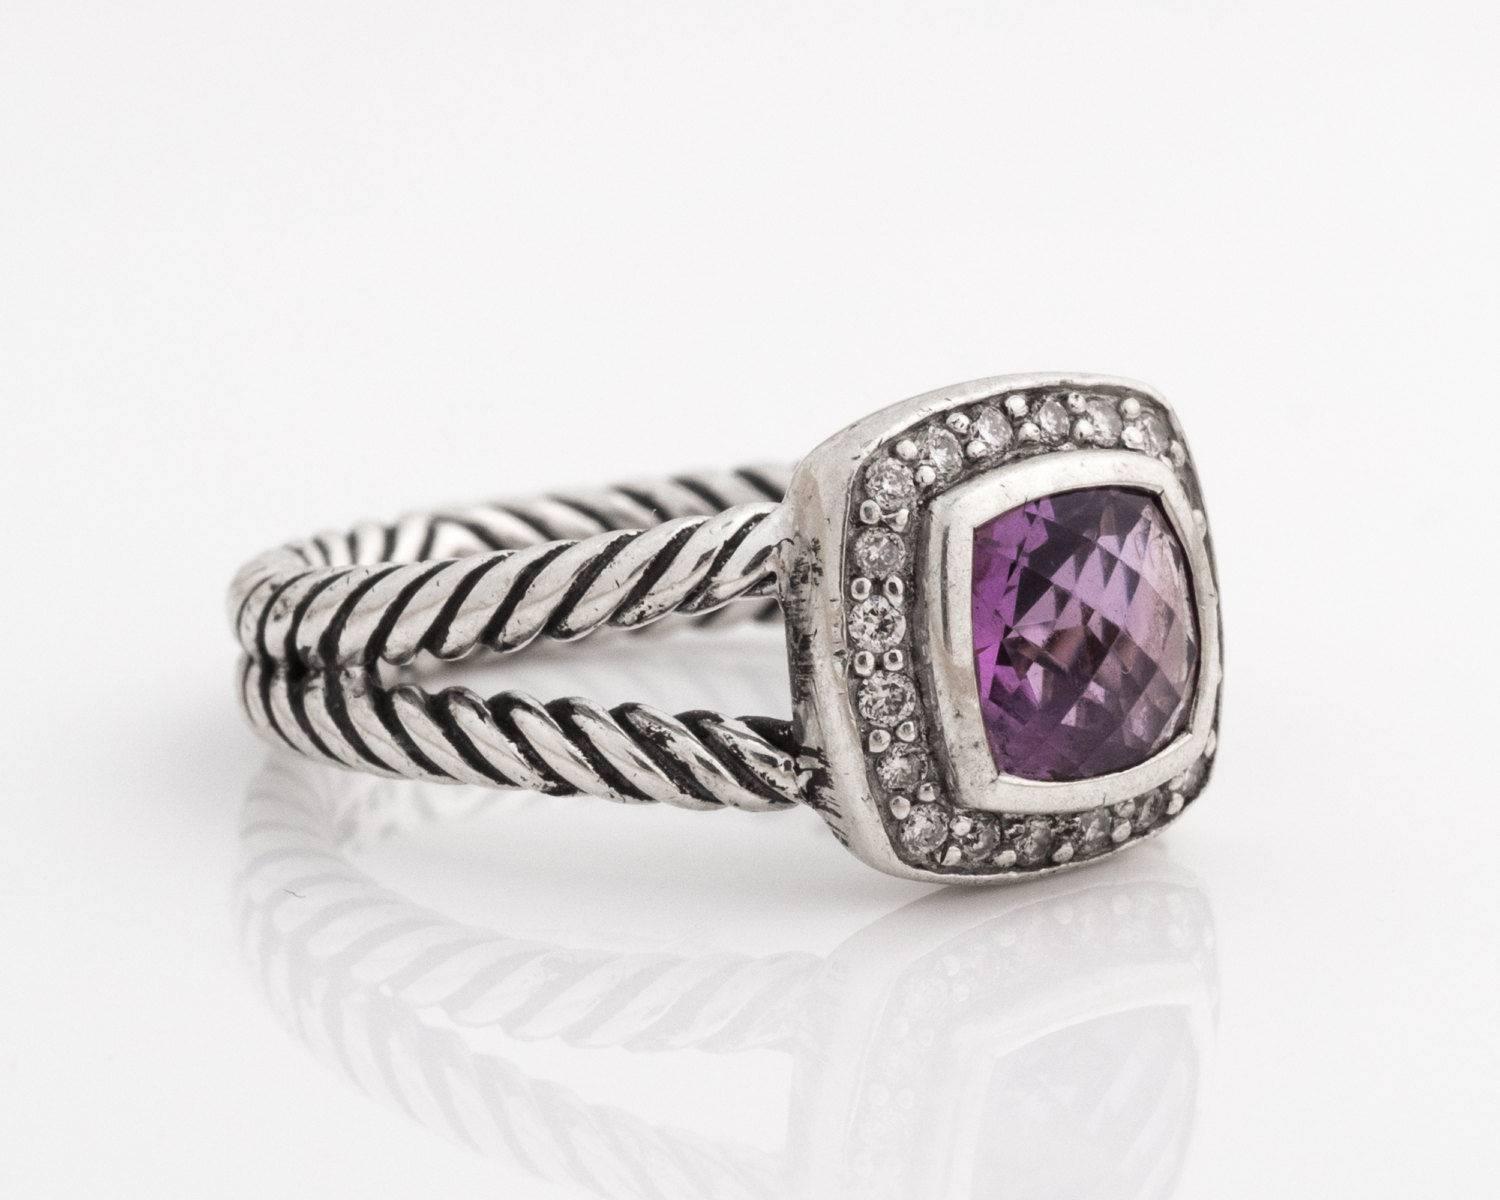 David Yurman Albion Ring - Sterling Silver, Amethyst, Diamonds

Features a faceted square cut Amethyst surrounded by a halo of diamonds. All of the gems are set in bezel frames. The Yurman cable ring has split shoulders. The cables meet halfway